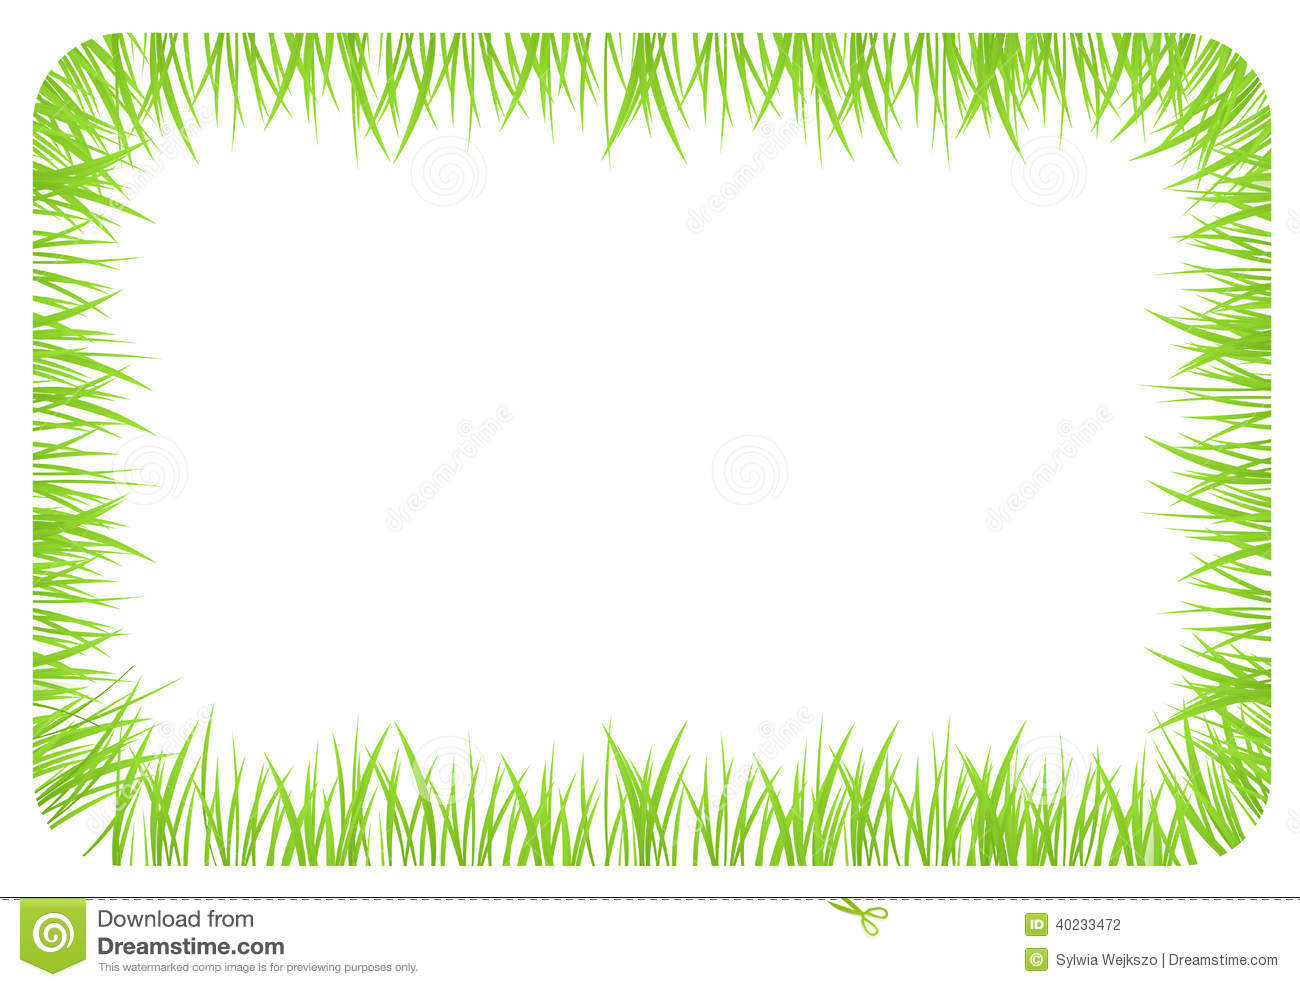 Banner With Borders Made Of Green Grass Stock Illustration   Image